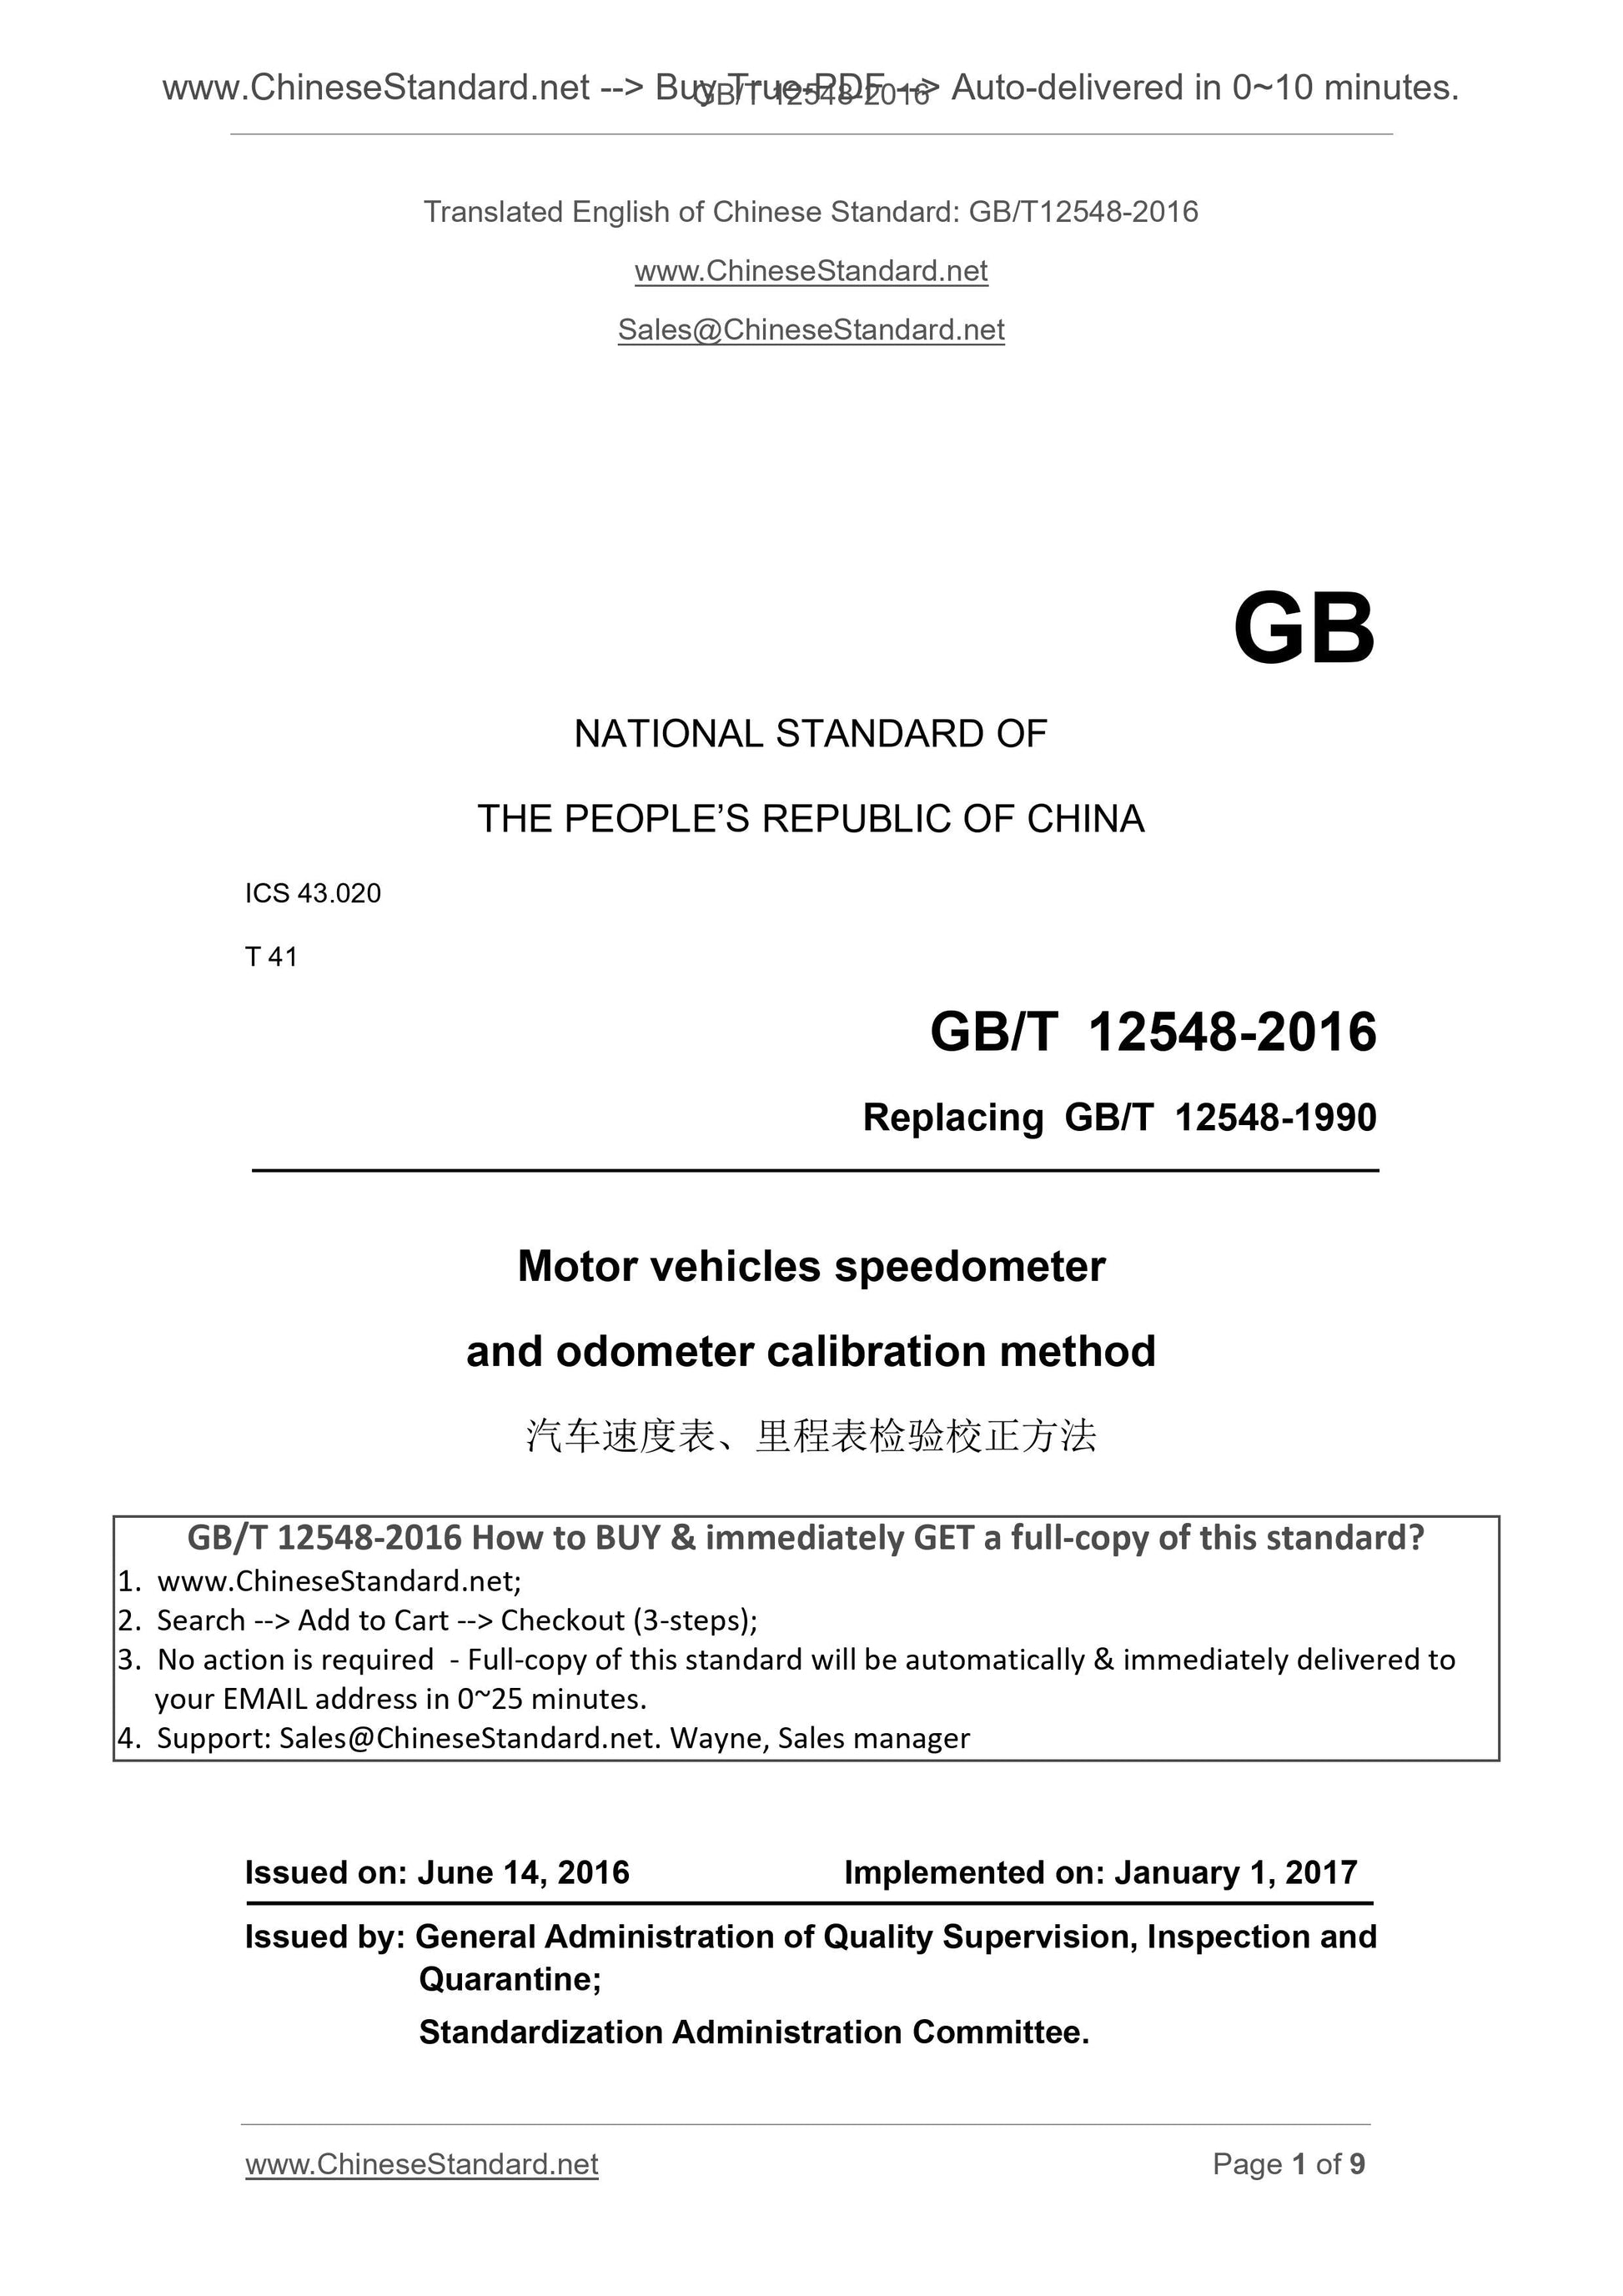 GB/T 12548-2016 Page 1